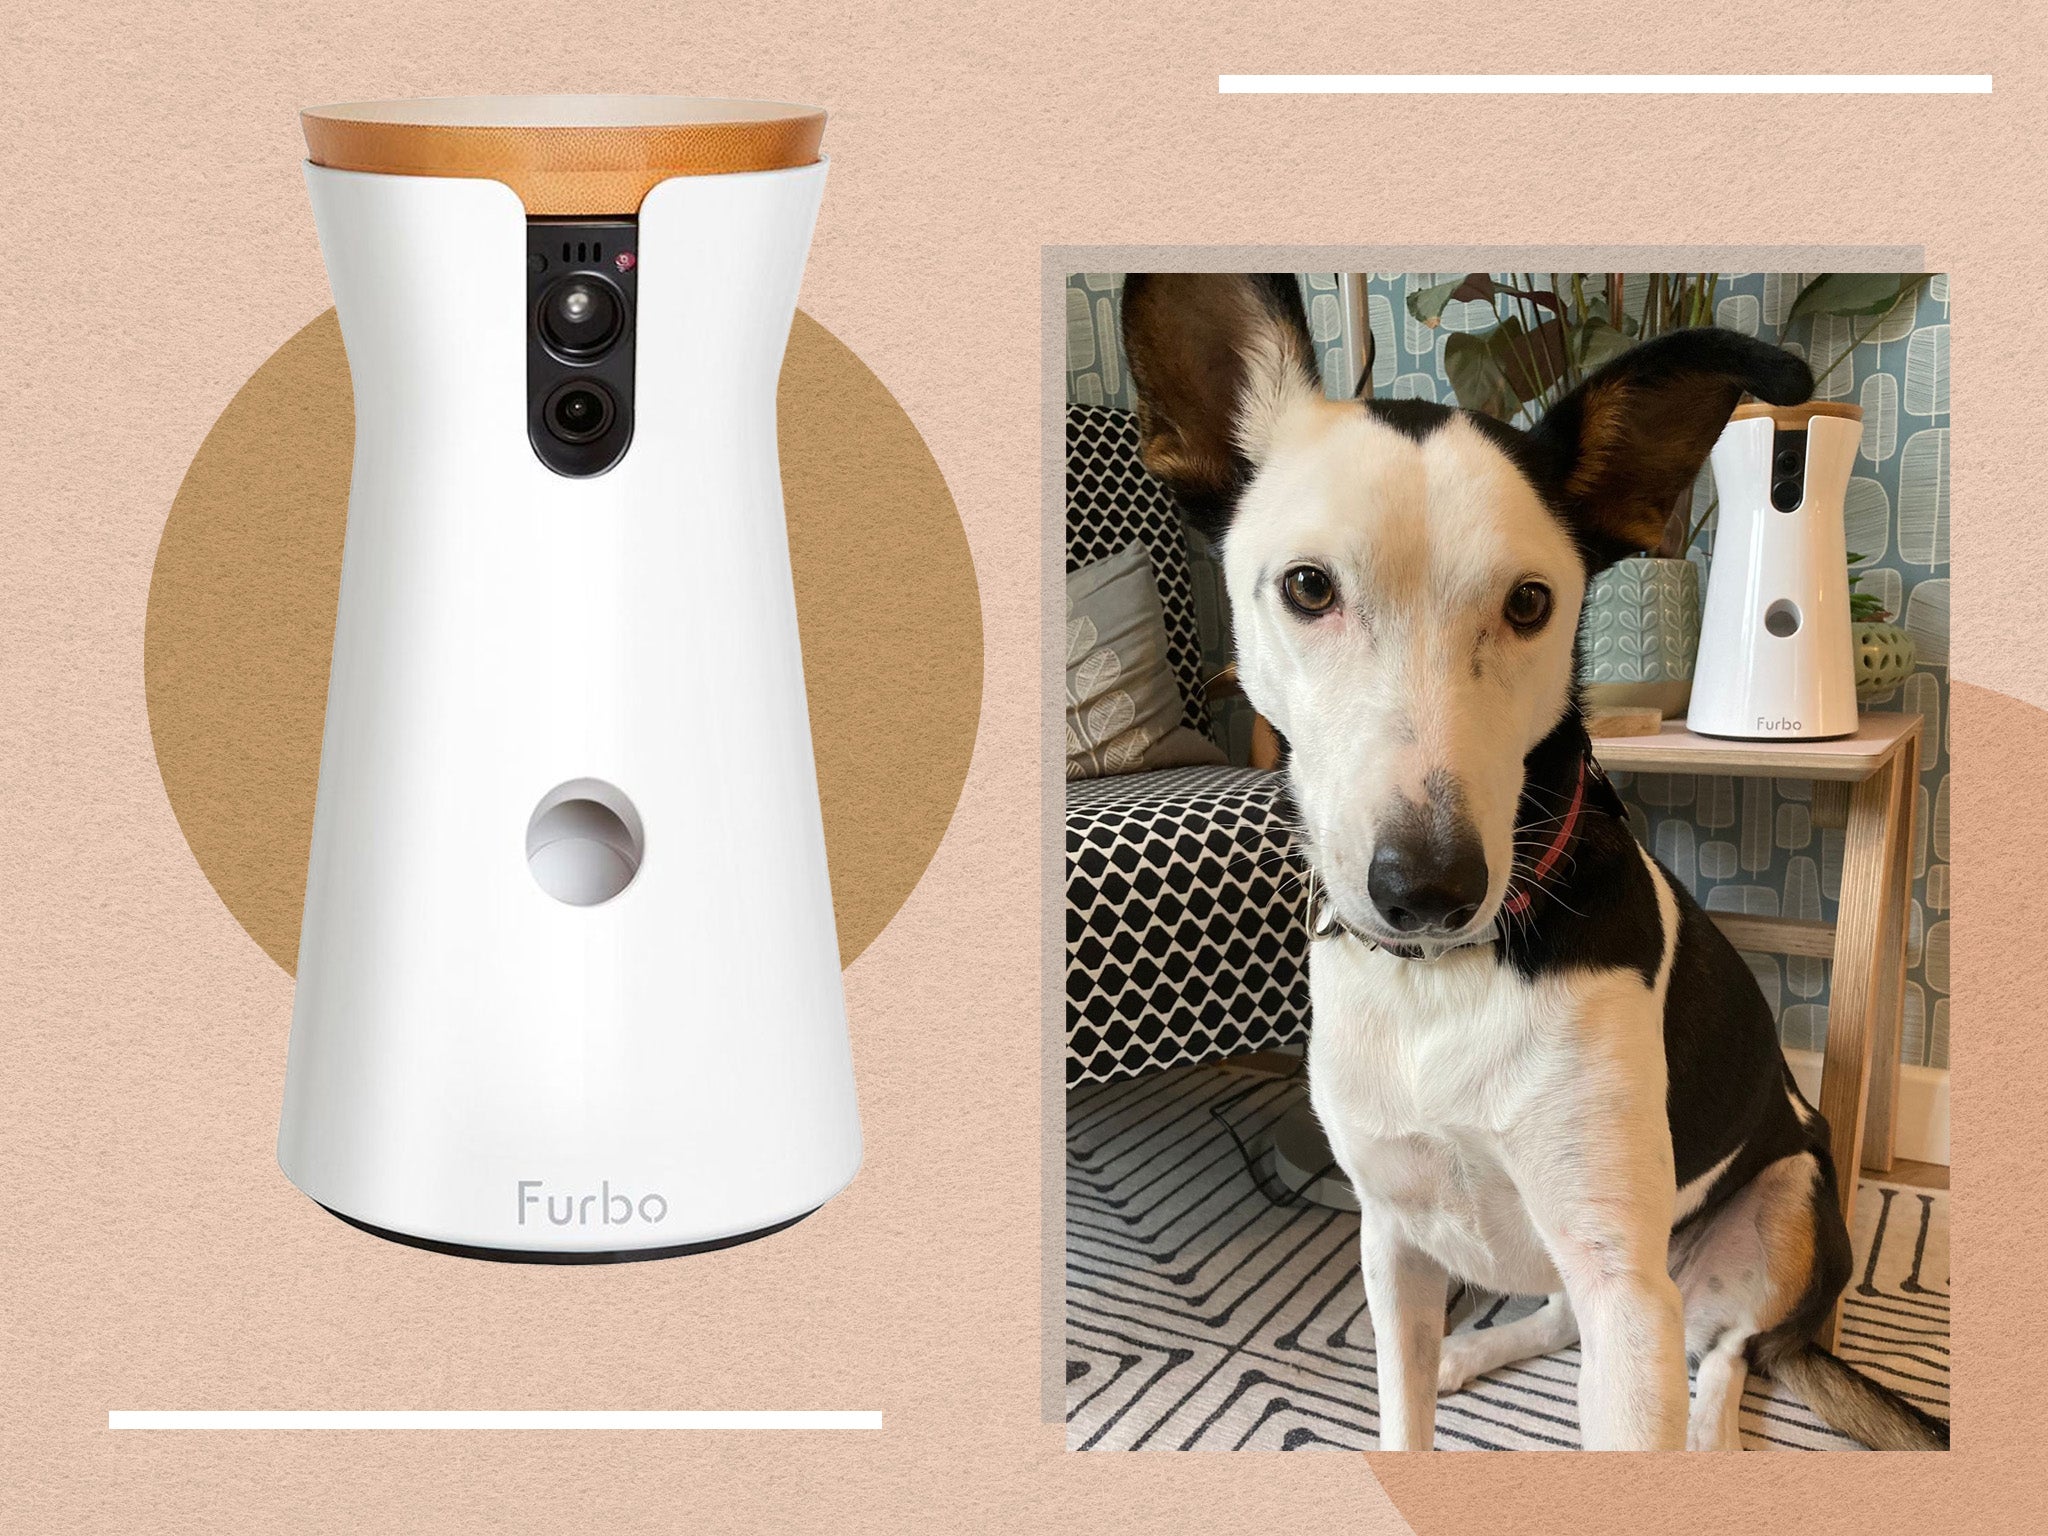 This Furbo dog camera helps reassure me my anxious pup is safe and at happy at home